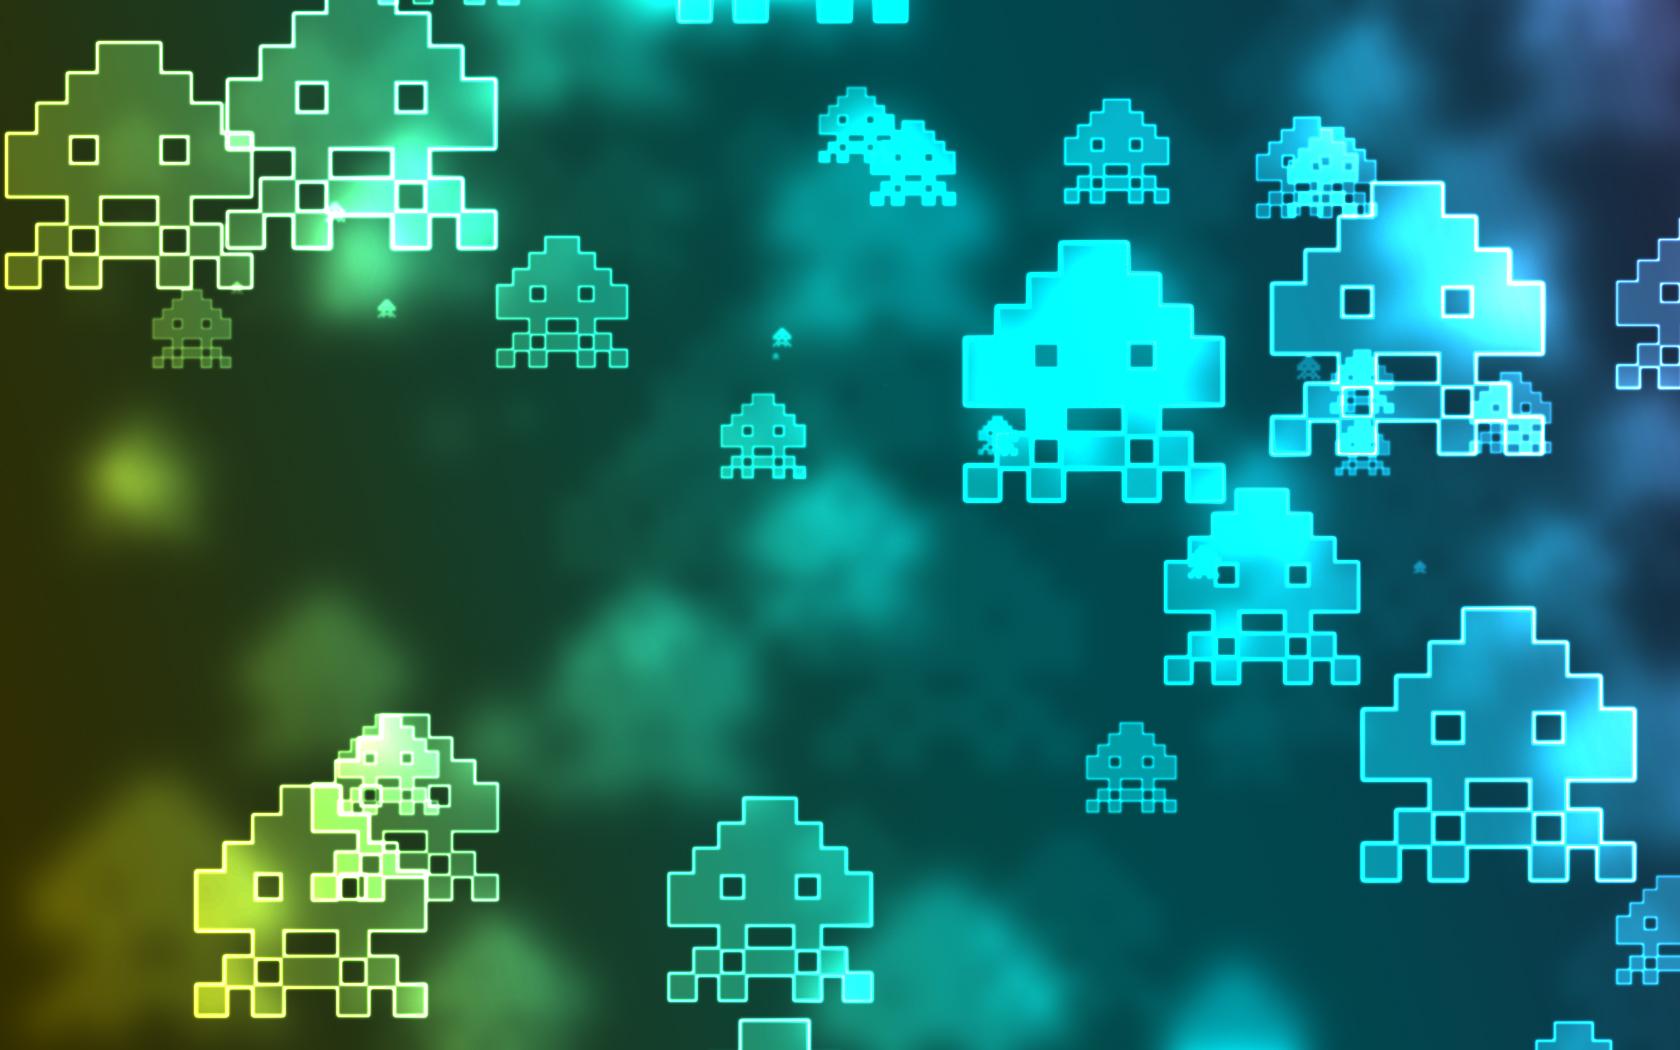 8 Bit Wallpaper You'll Totally Want For Your Android